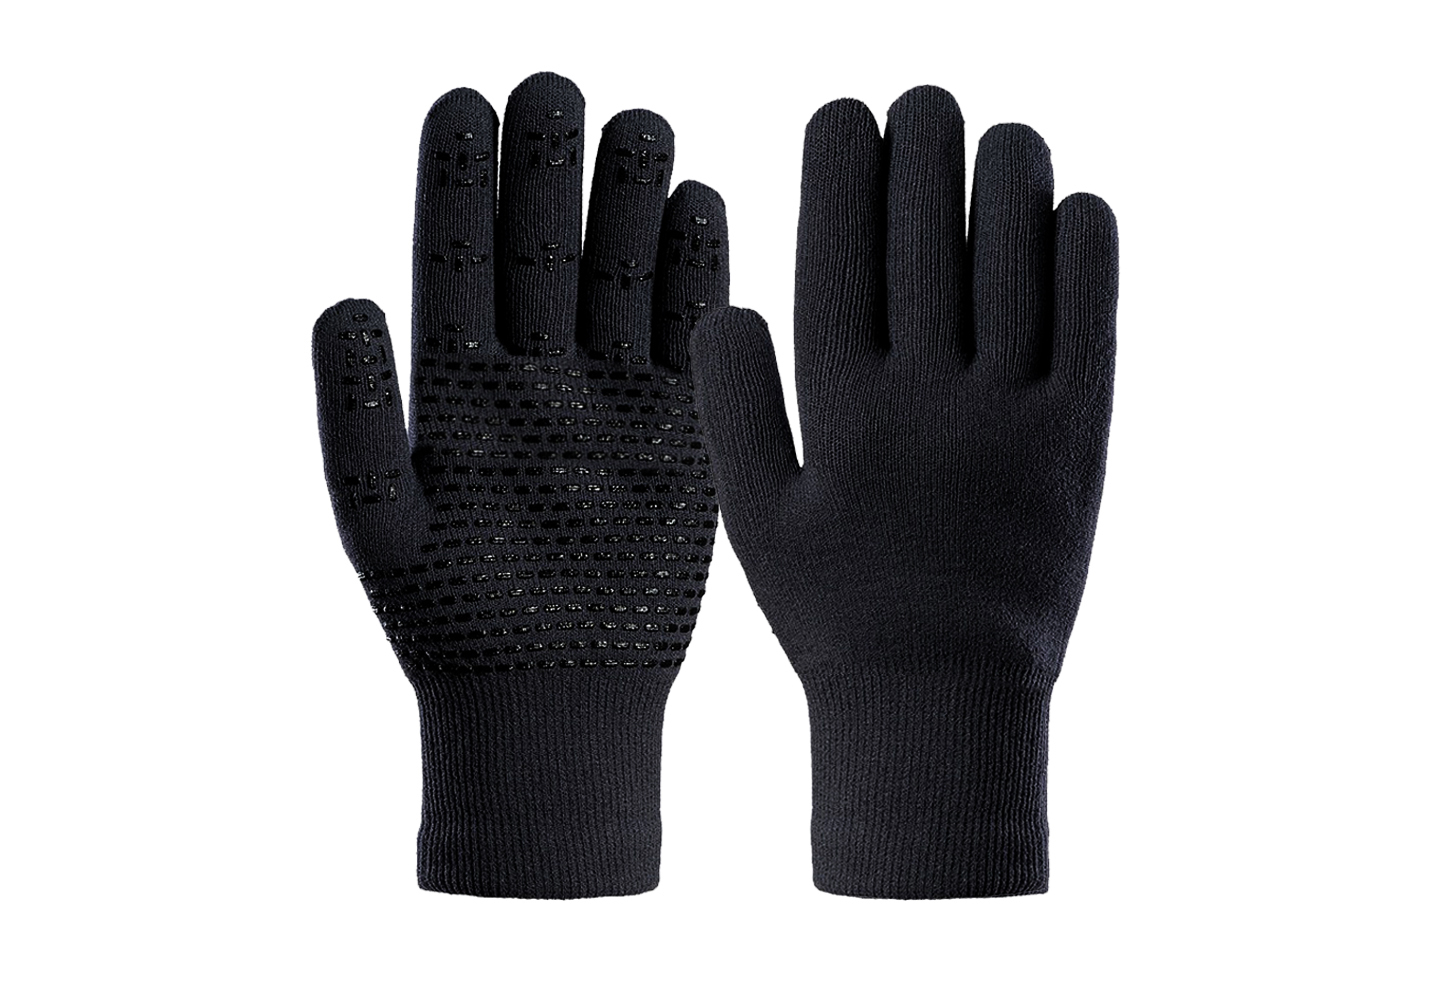 Merino Wool Gloves with Silicone on Palm/MWG-005